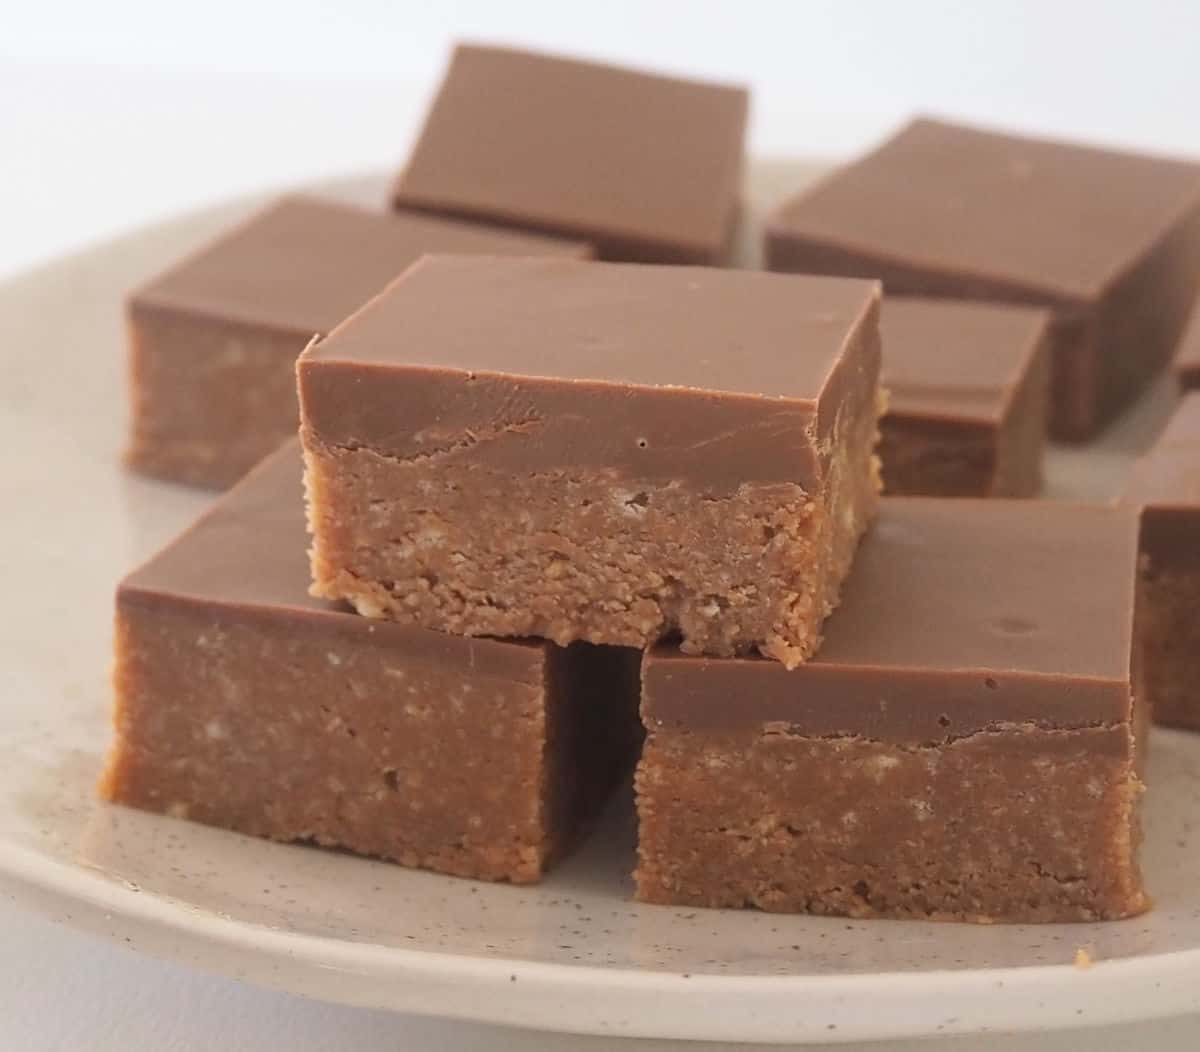 Pieces of Caramello Slice stacked on a speckled plate.